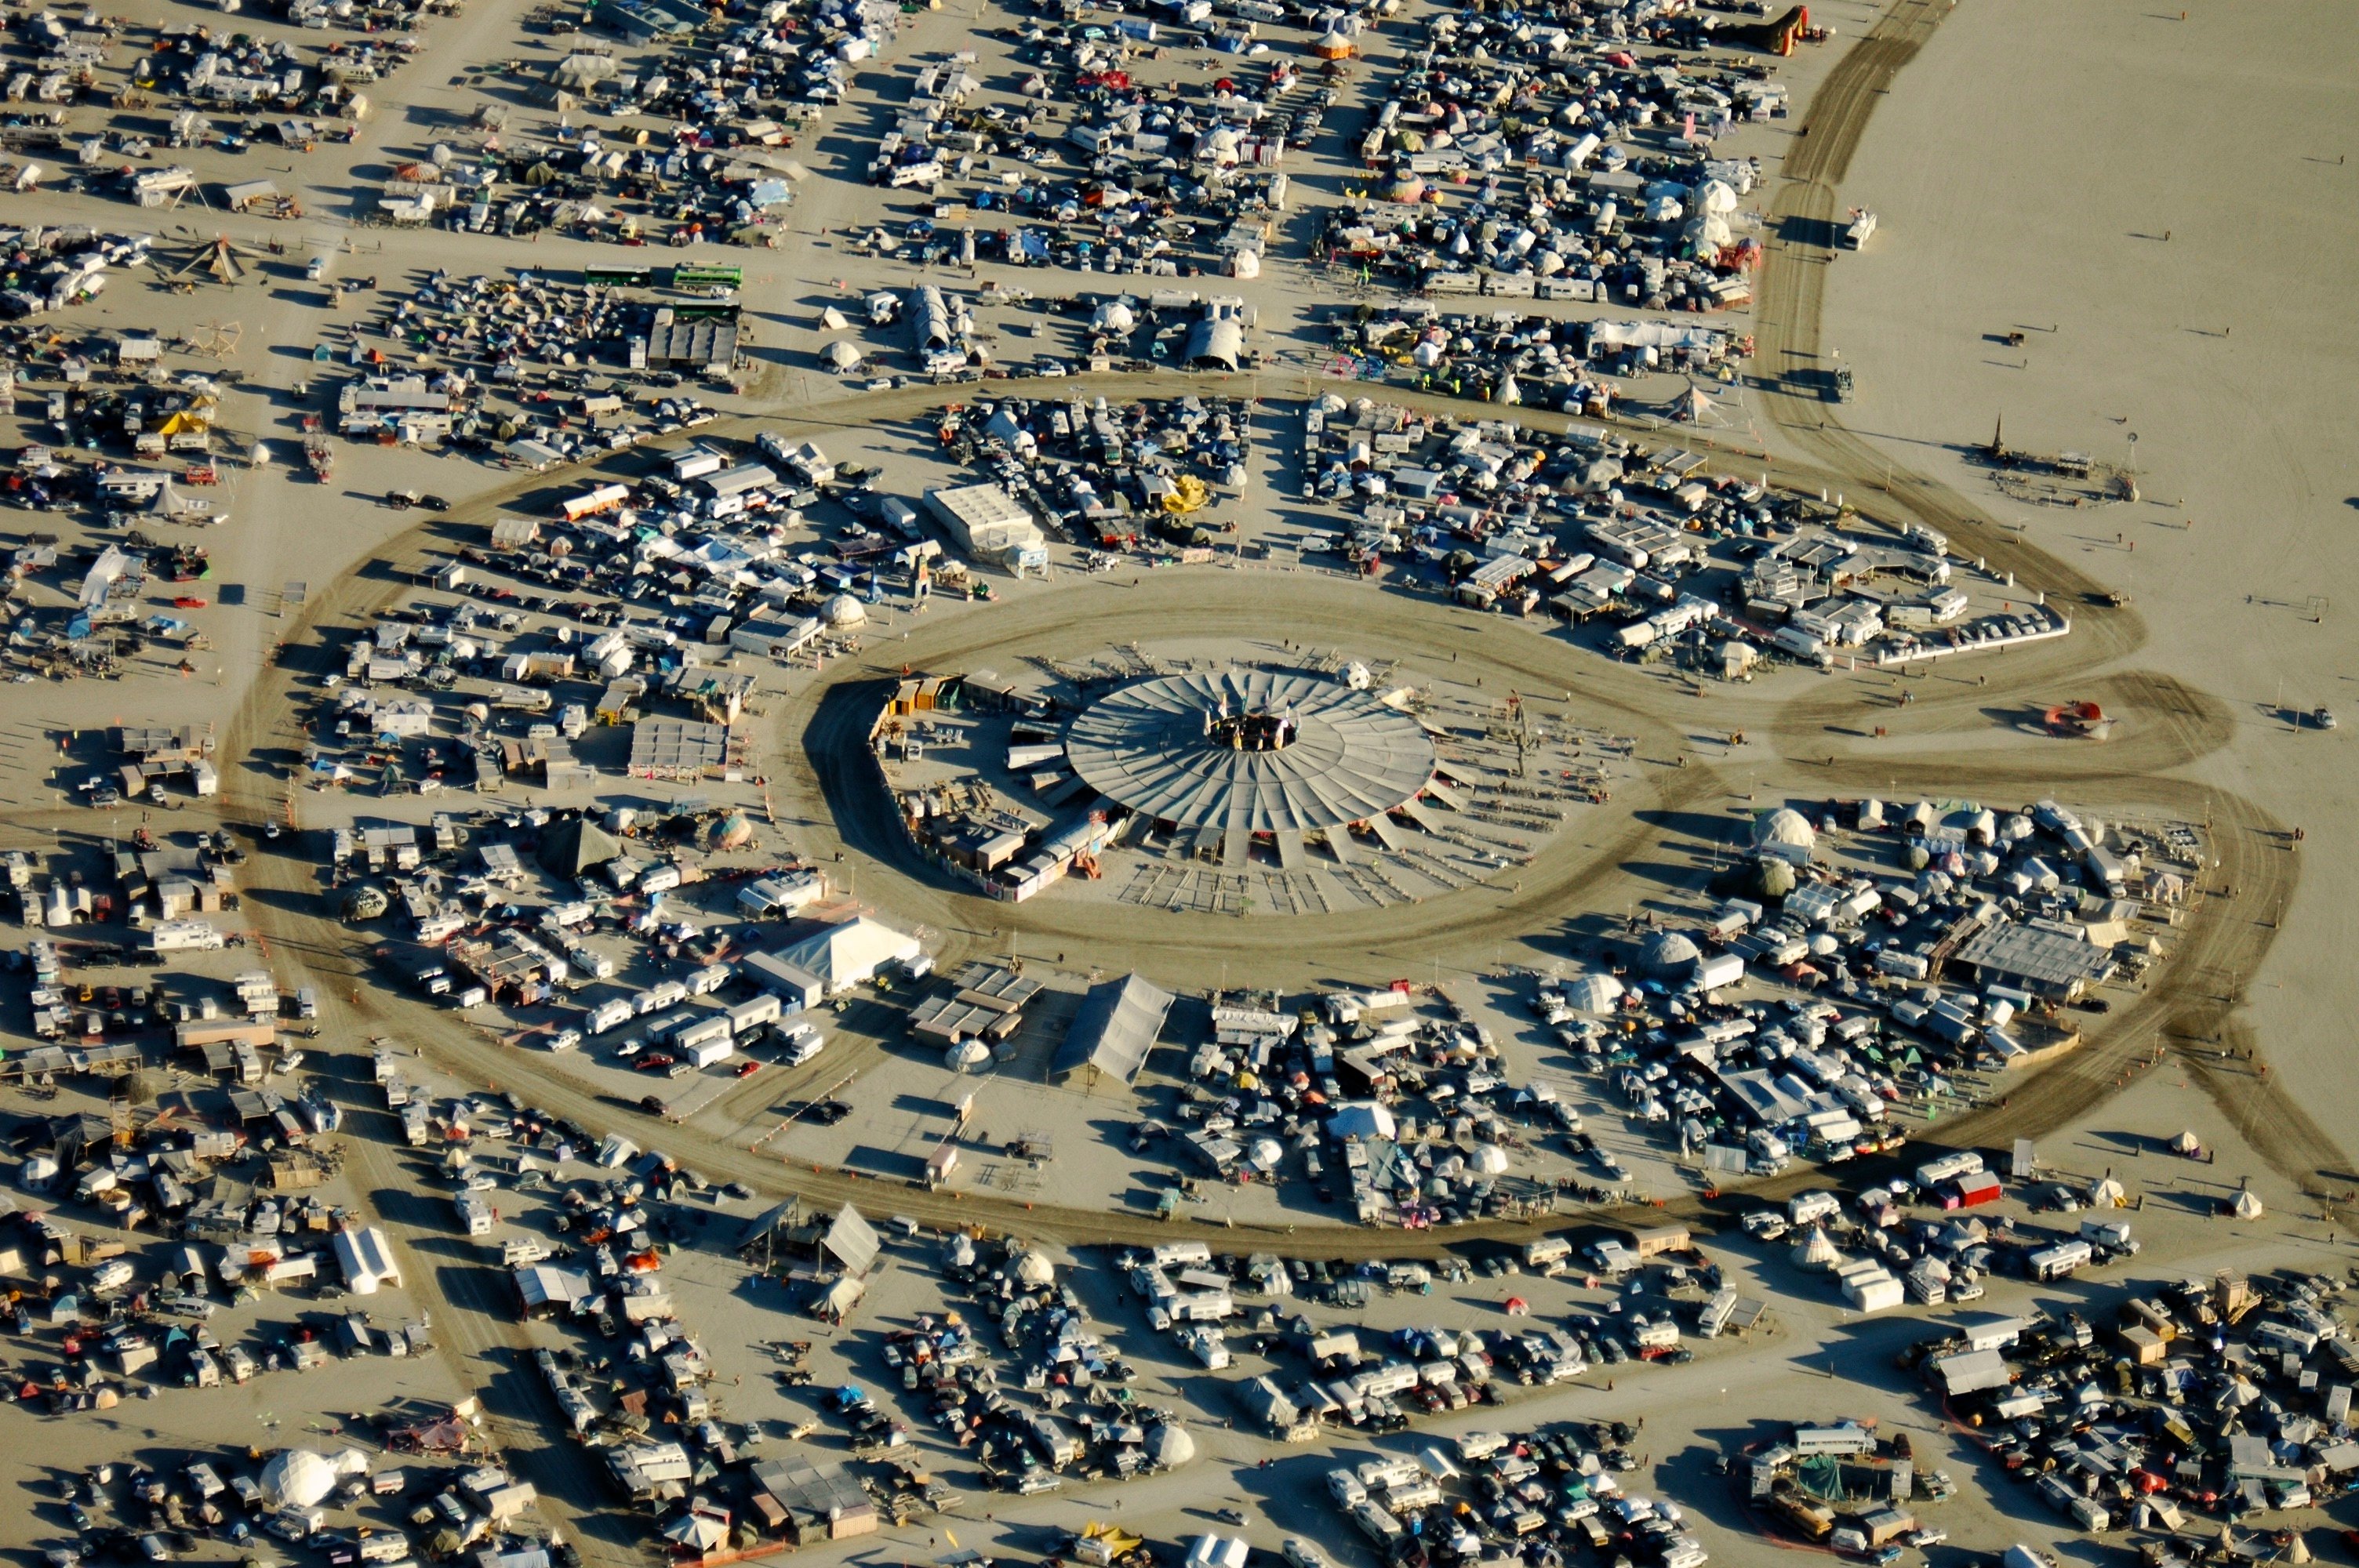 A Man Who Has Attended Burning Man For Decades Captured The Event From His Airplane See His Stunning Photos Here